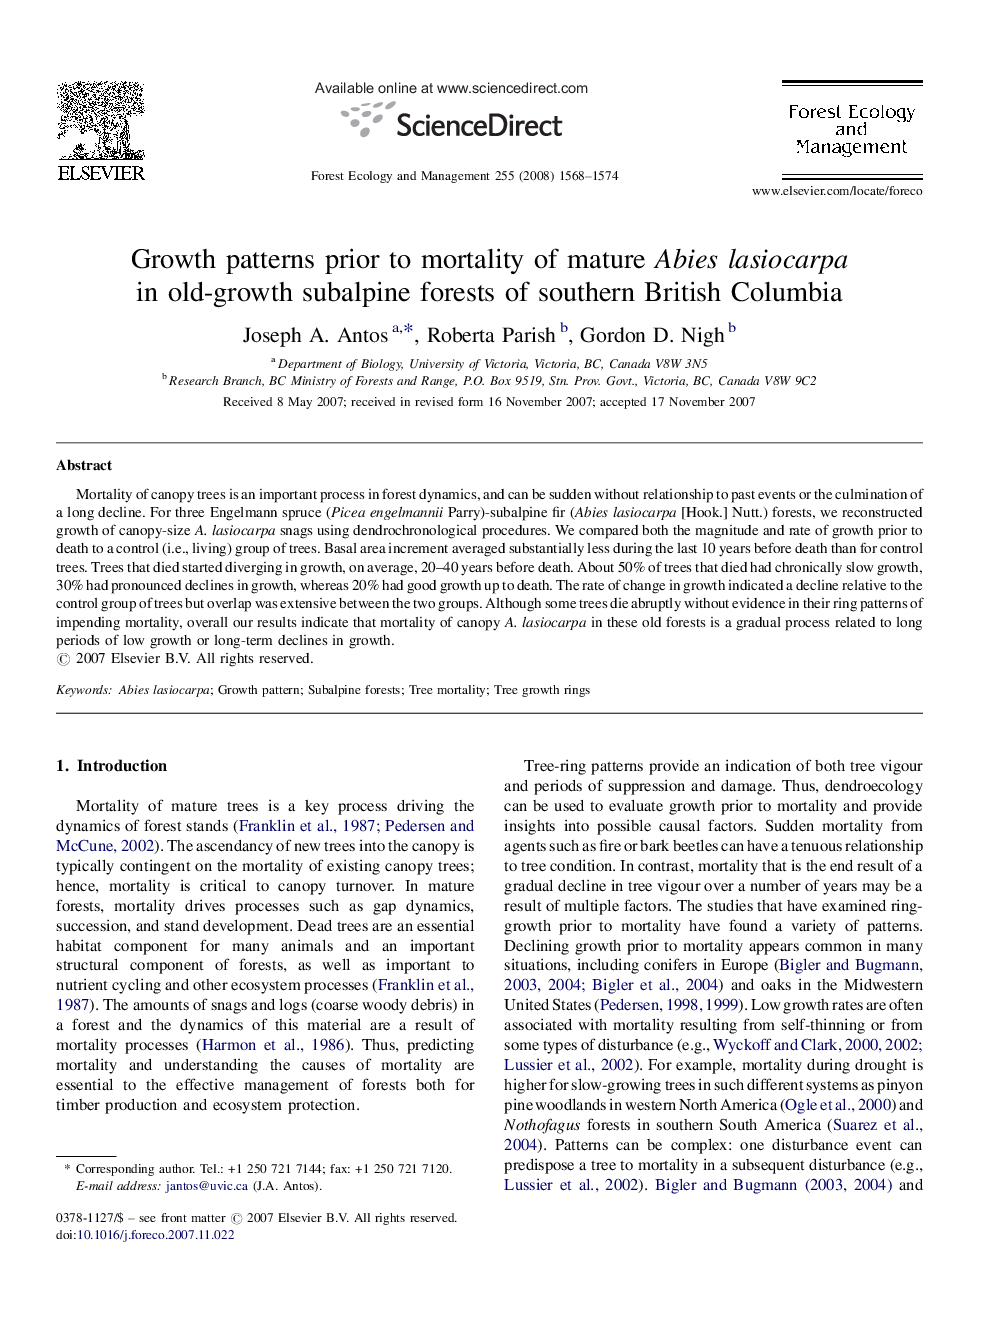 Growth patterns prior to mortality of mature Abies lasiocarpa in old-growth subalpine forests of southern British Columbia